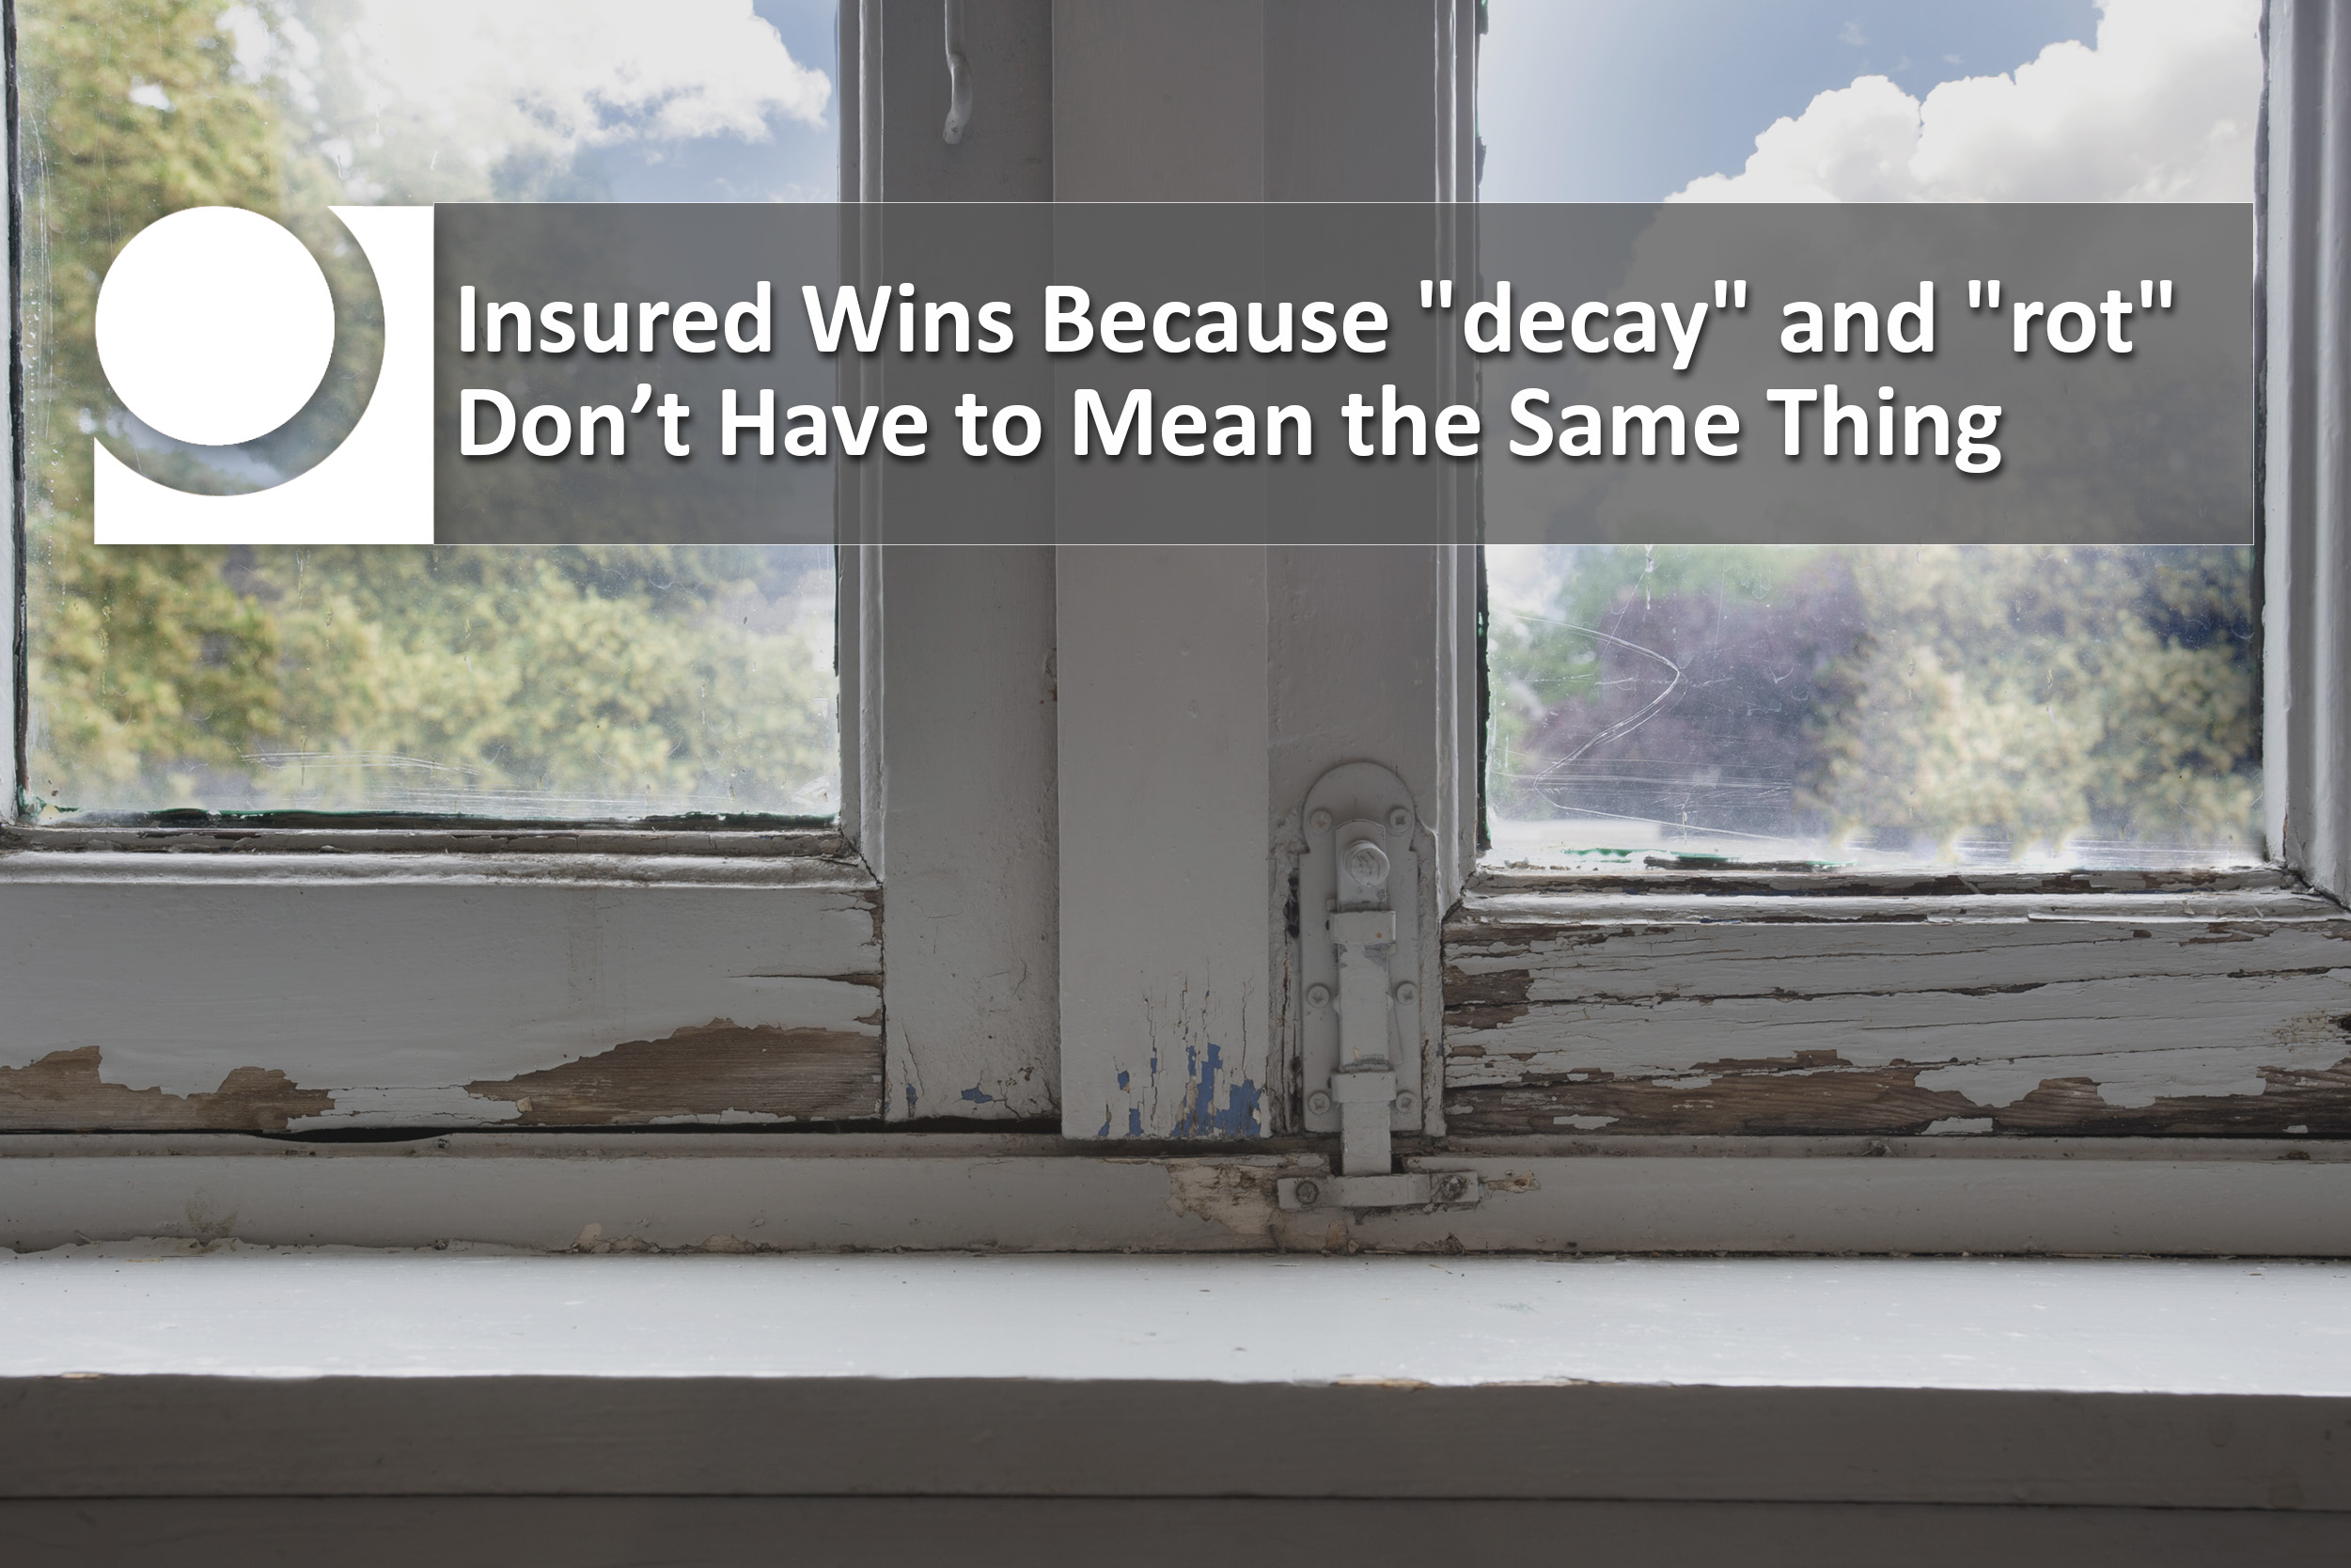 Insured wins because “decay” and “rot” don’t have to mean the same thing